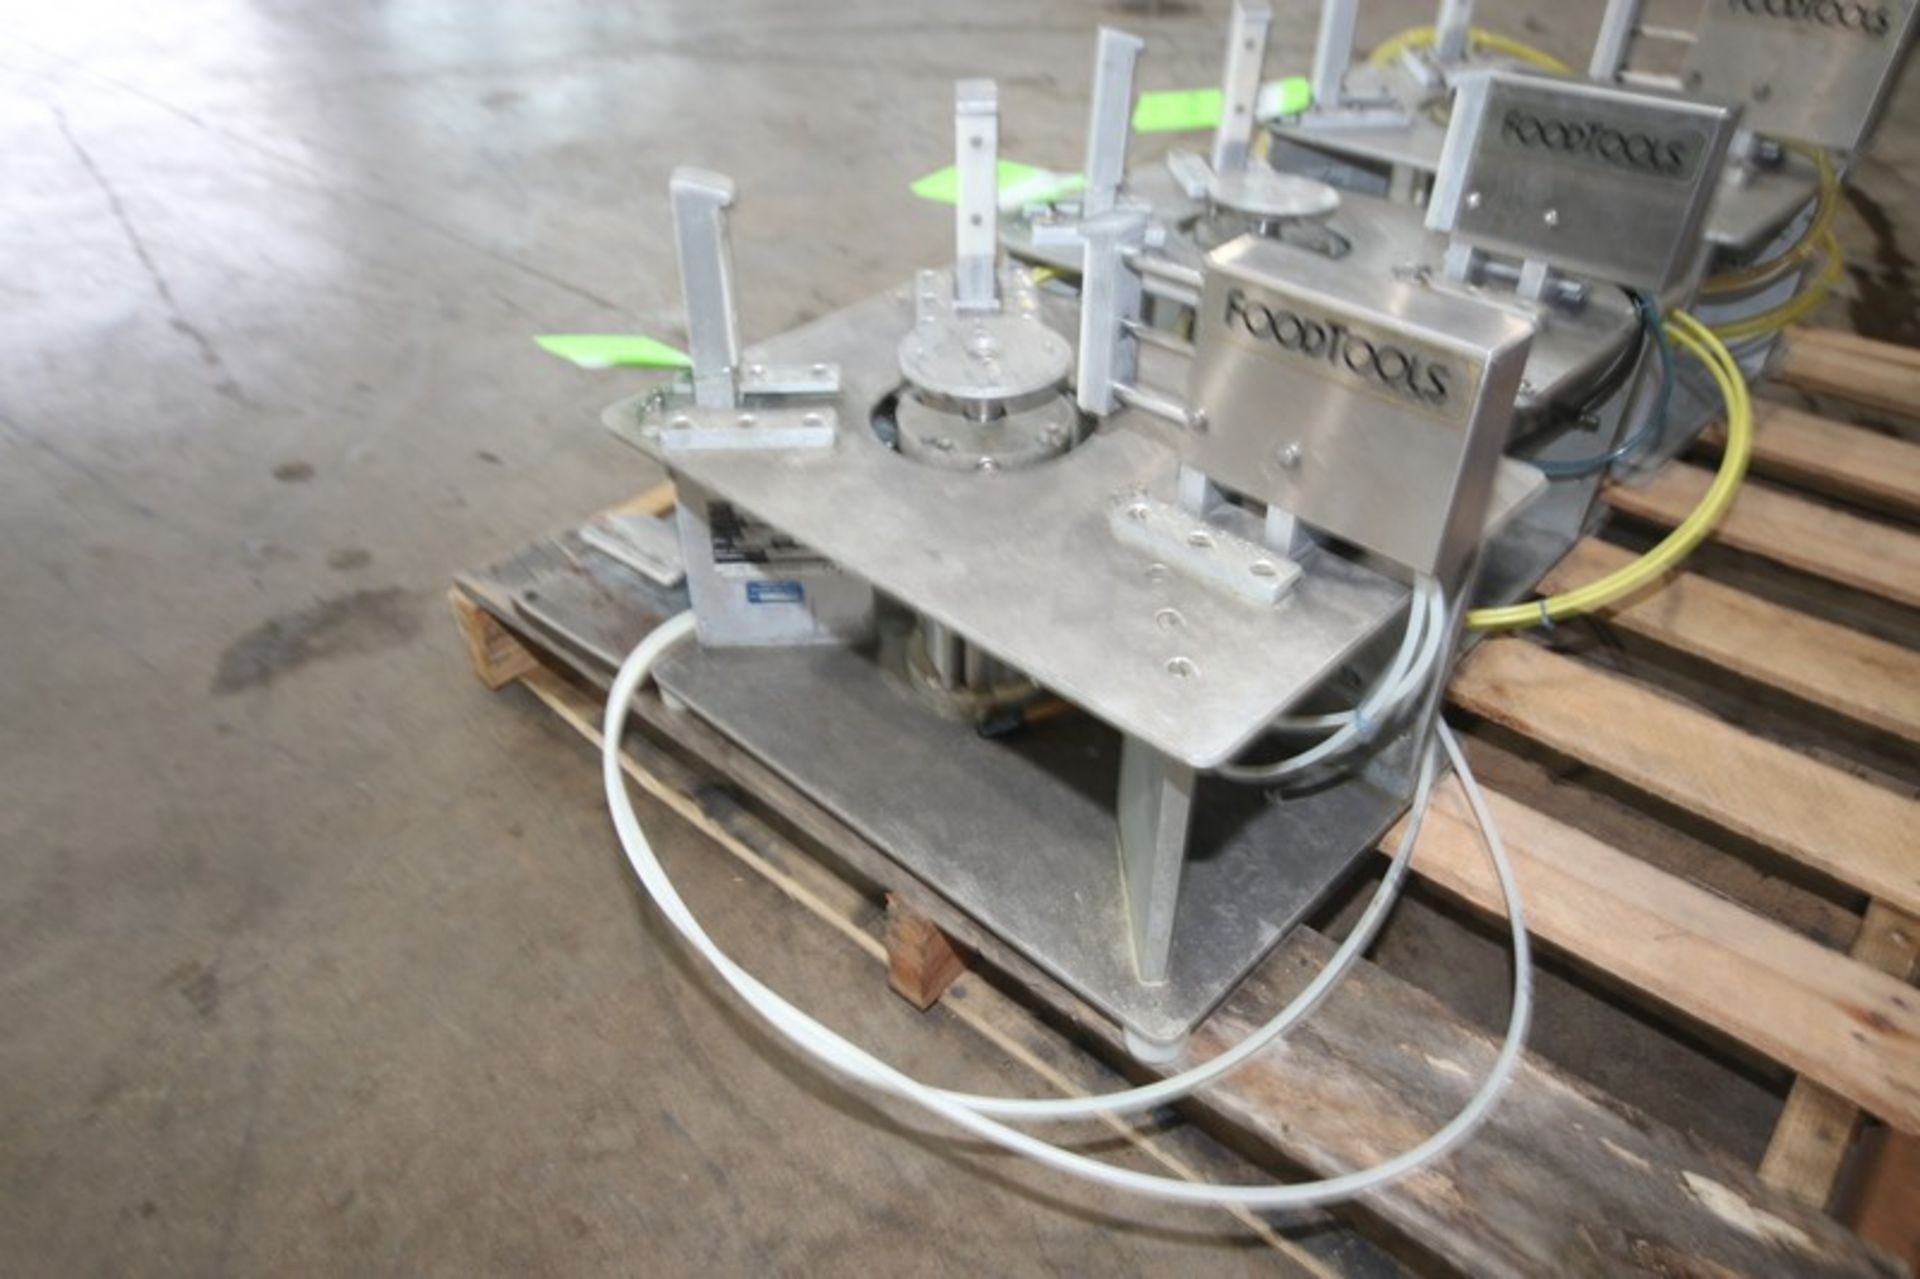 FoodTools S/S Frozen Cake Depanner, M/N CD-9B, S/N 3061, Max. Operating Pressure 100 PSIG, with Foot - Image 5 of 8